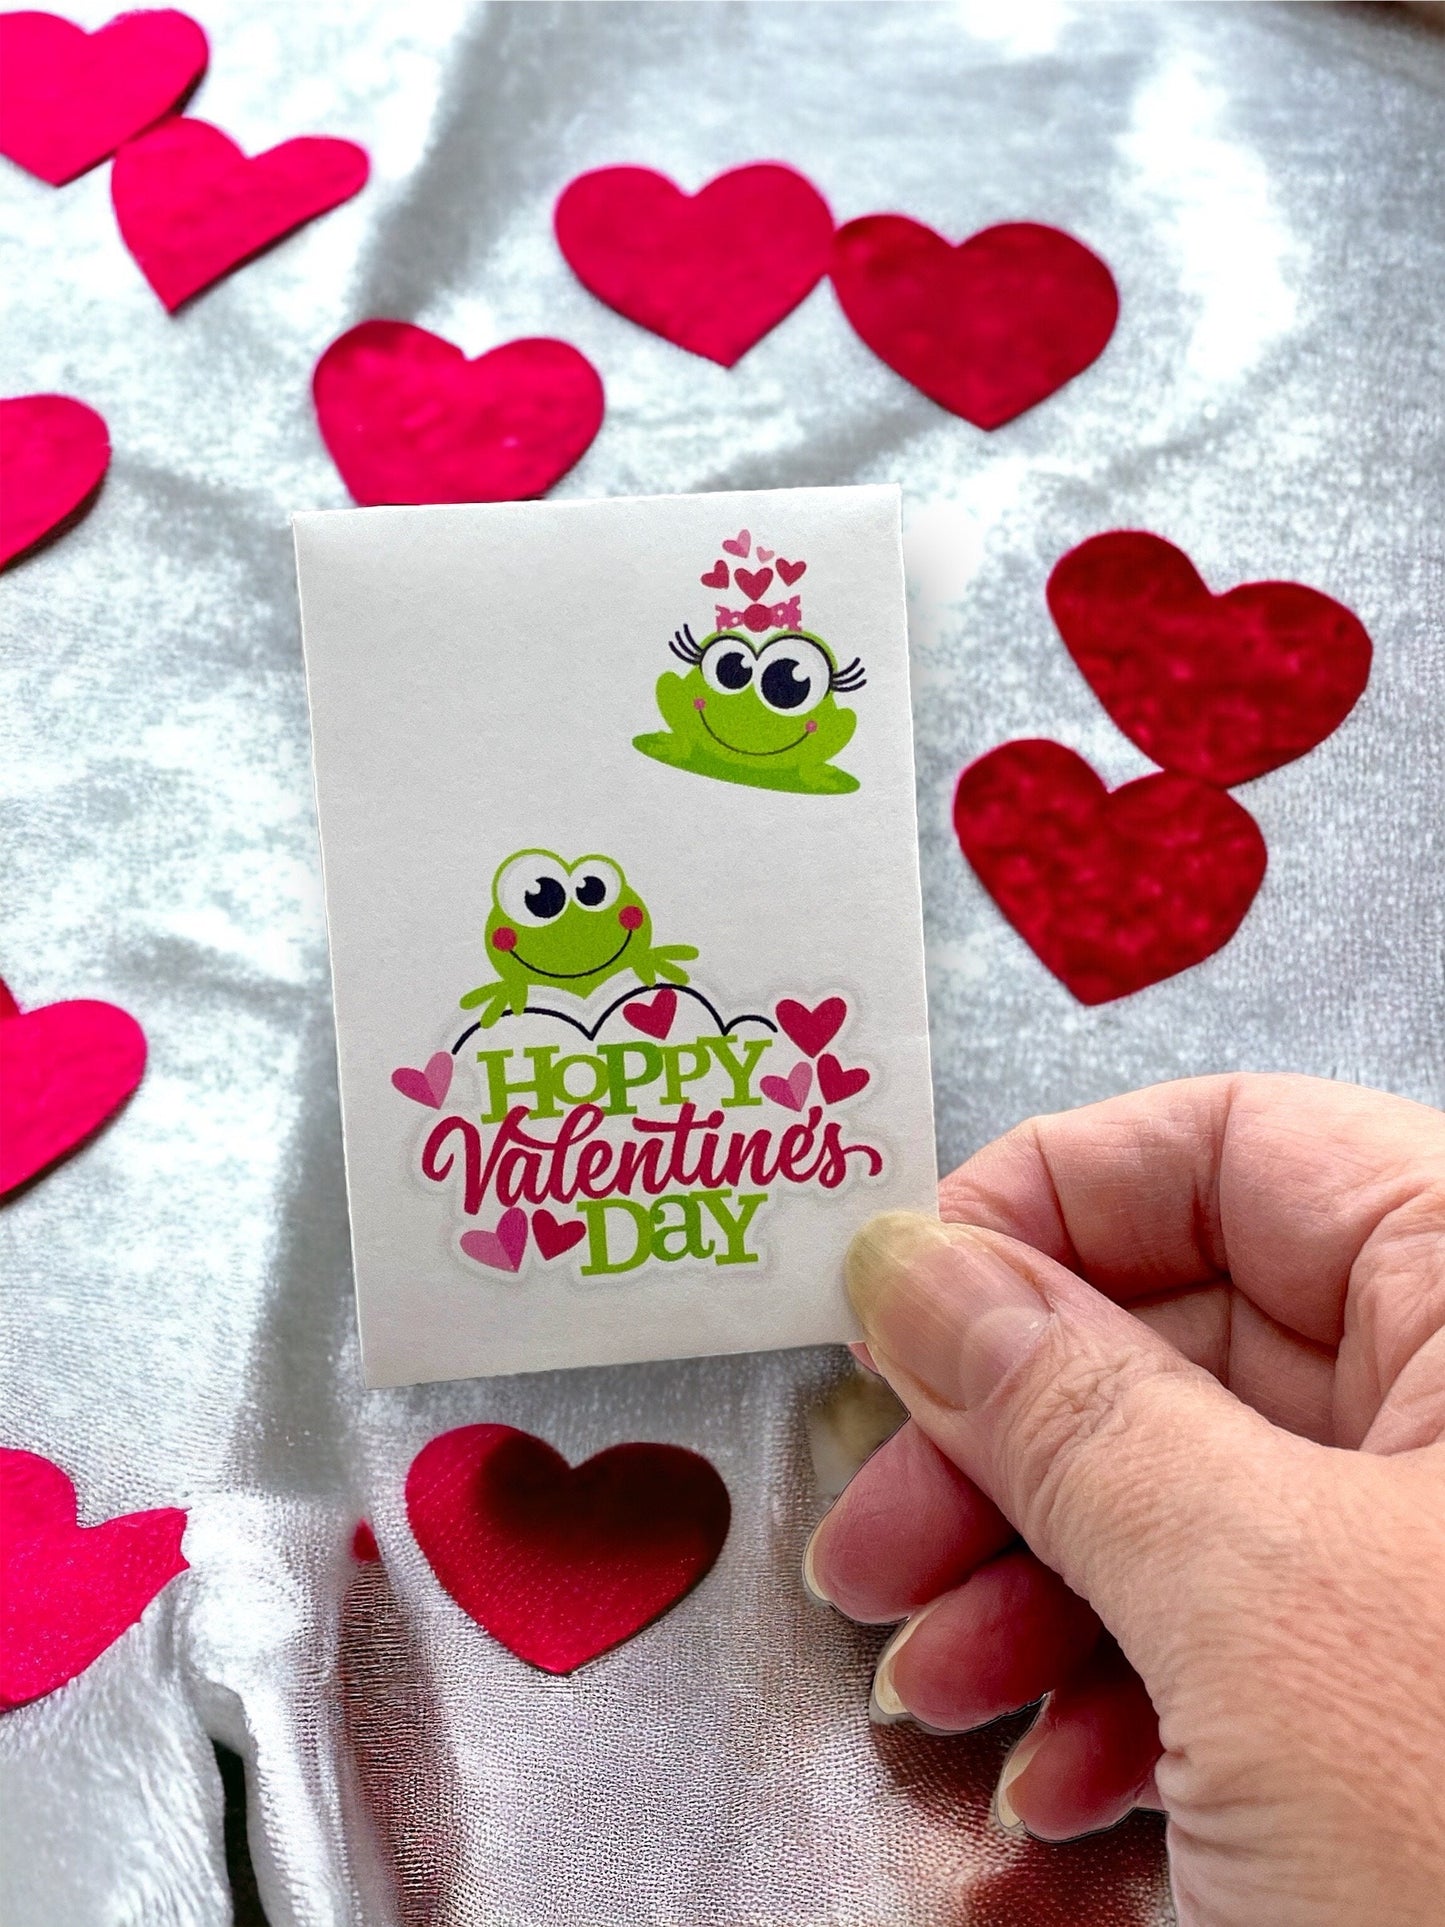 Seed Packages - Valentine’s Day Gift for Kids - Includes Seeds